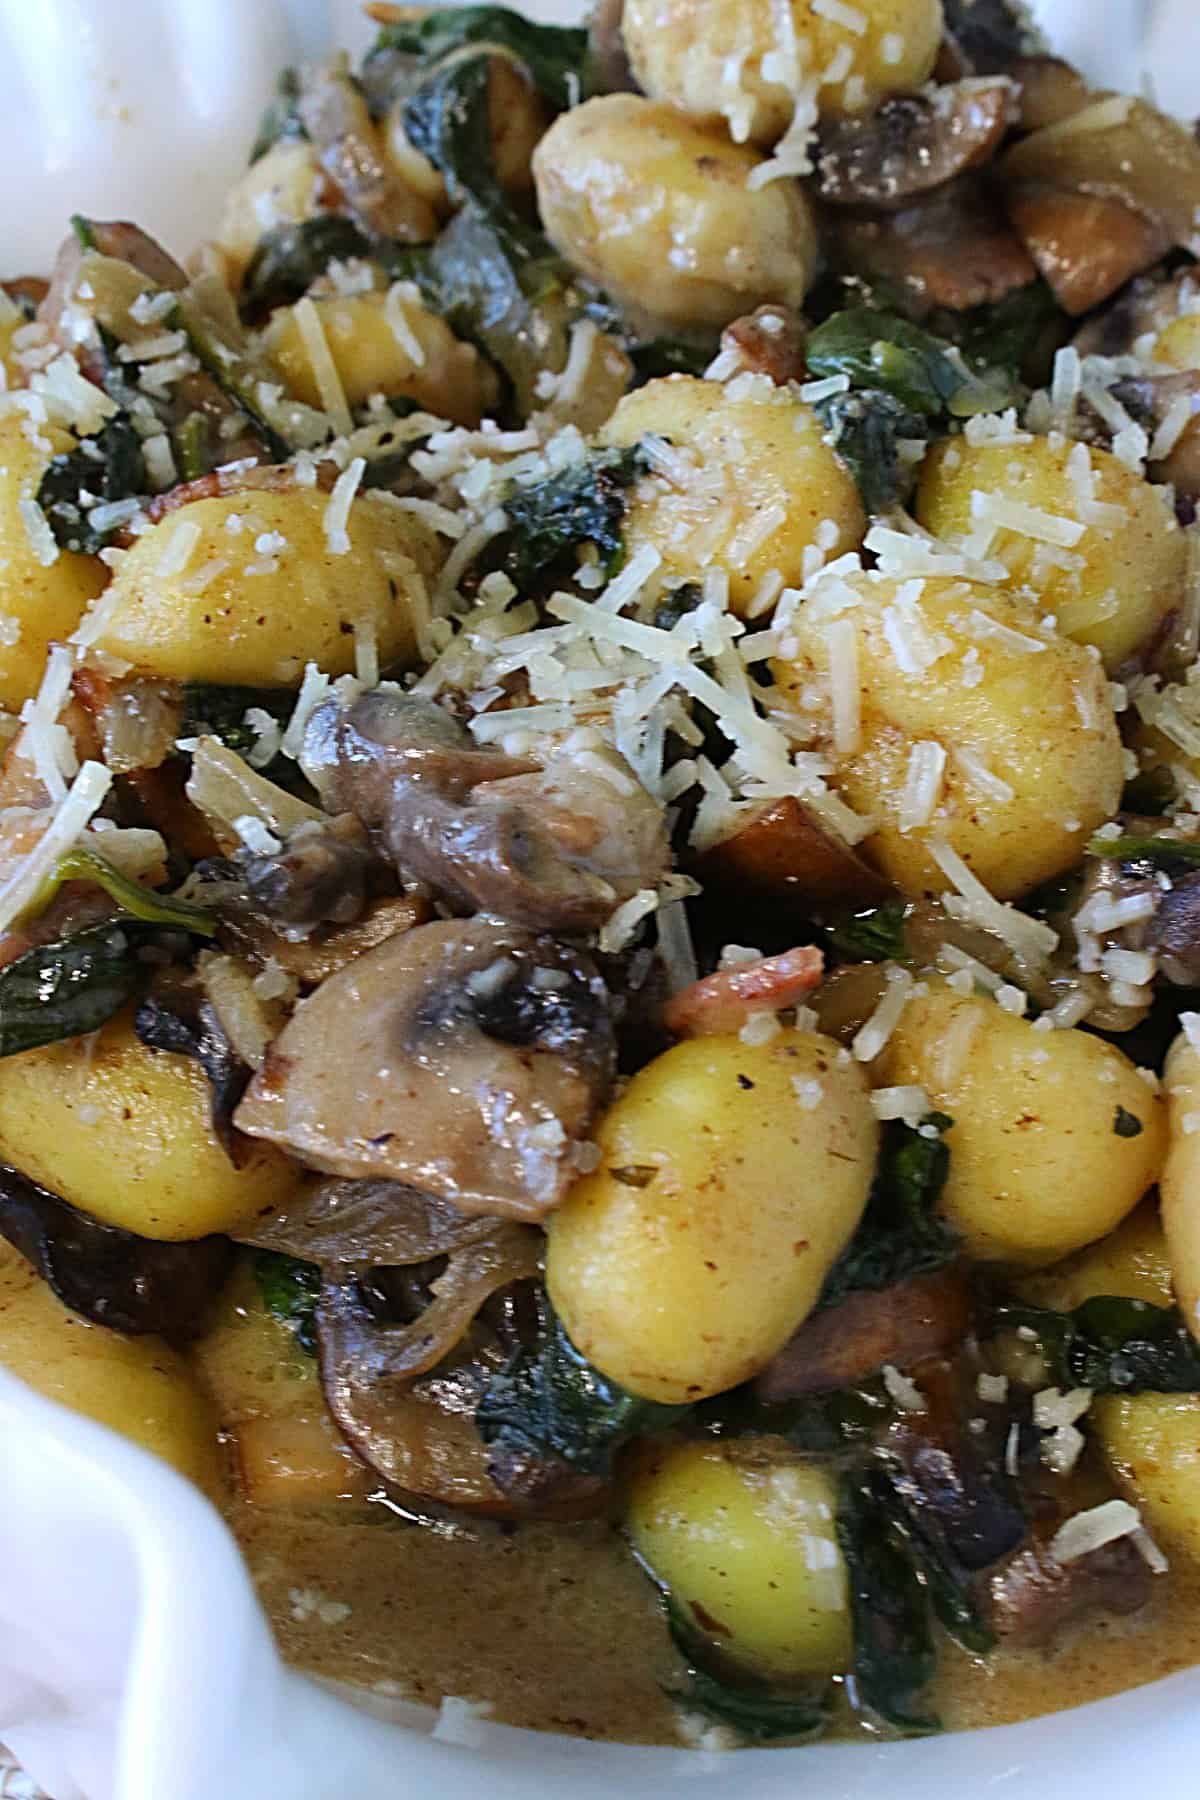 Grated Parmesan on top of Potato Gnocchi with Spinach and Mushrooms.